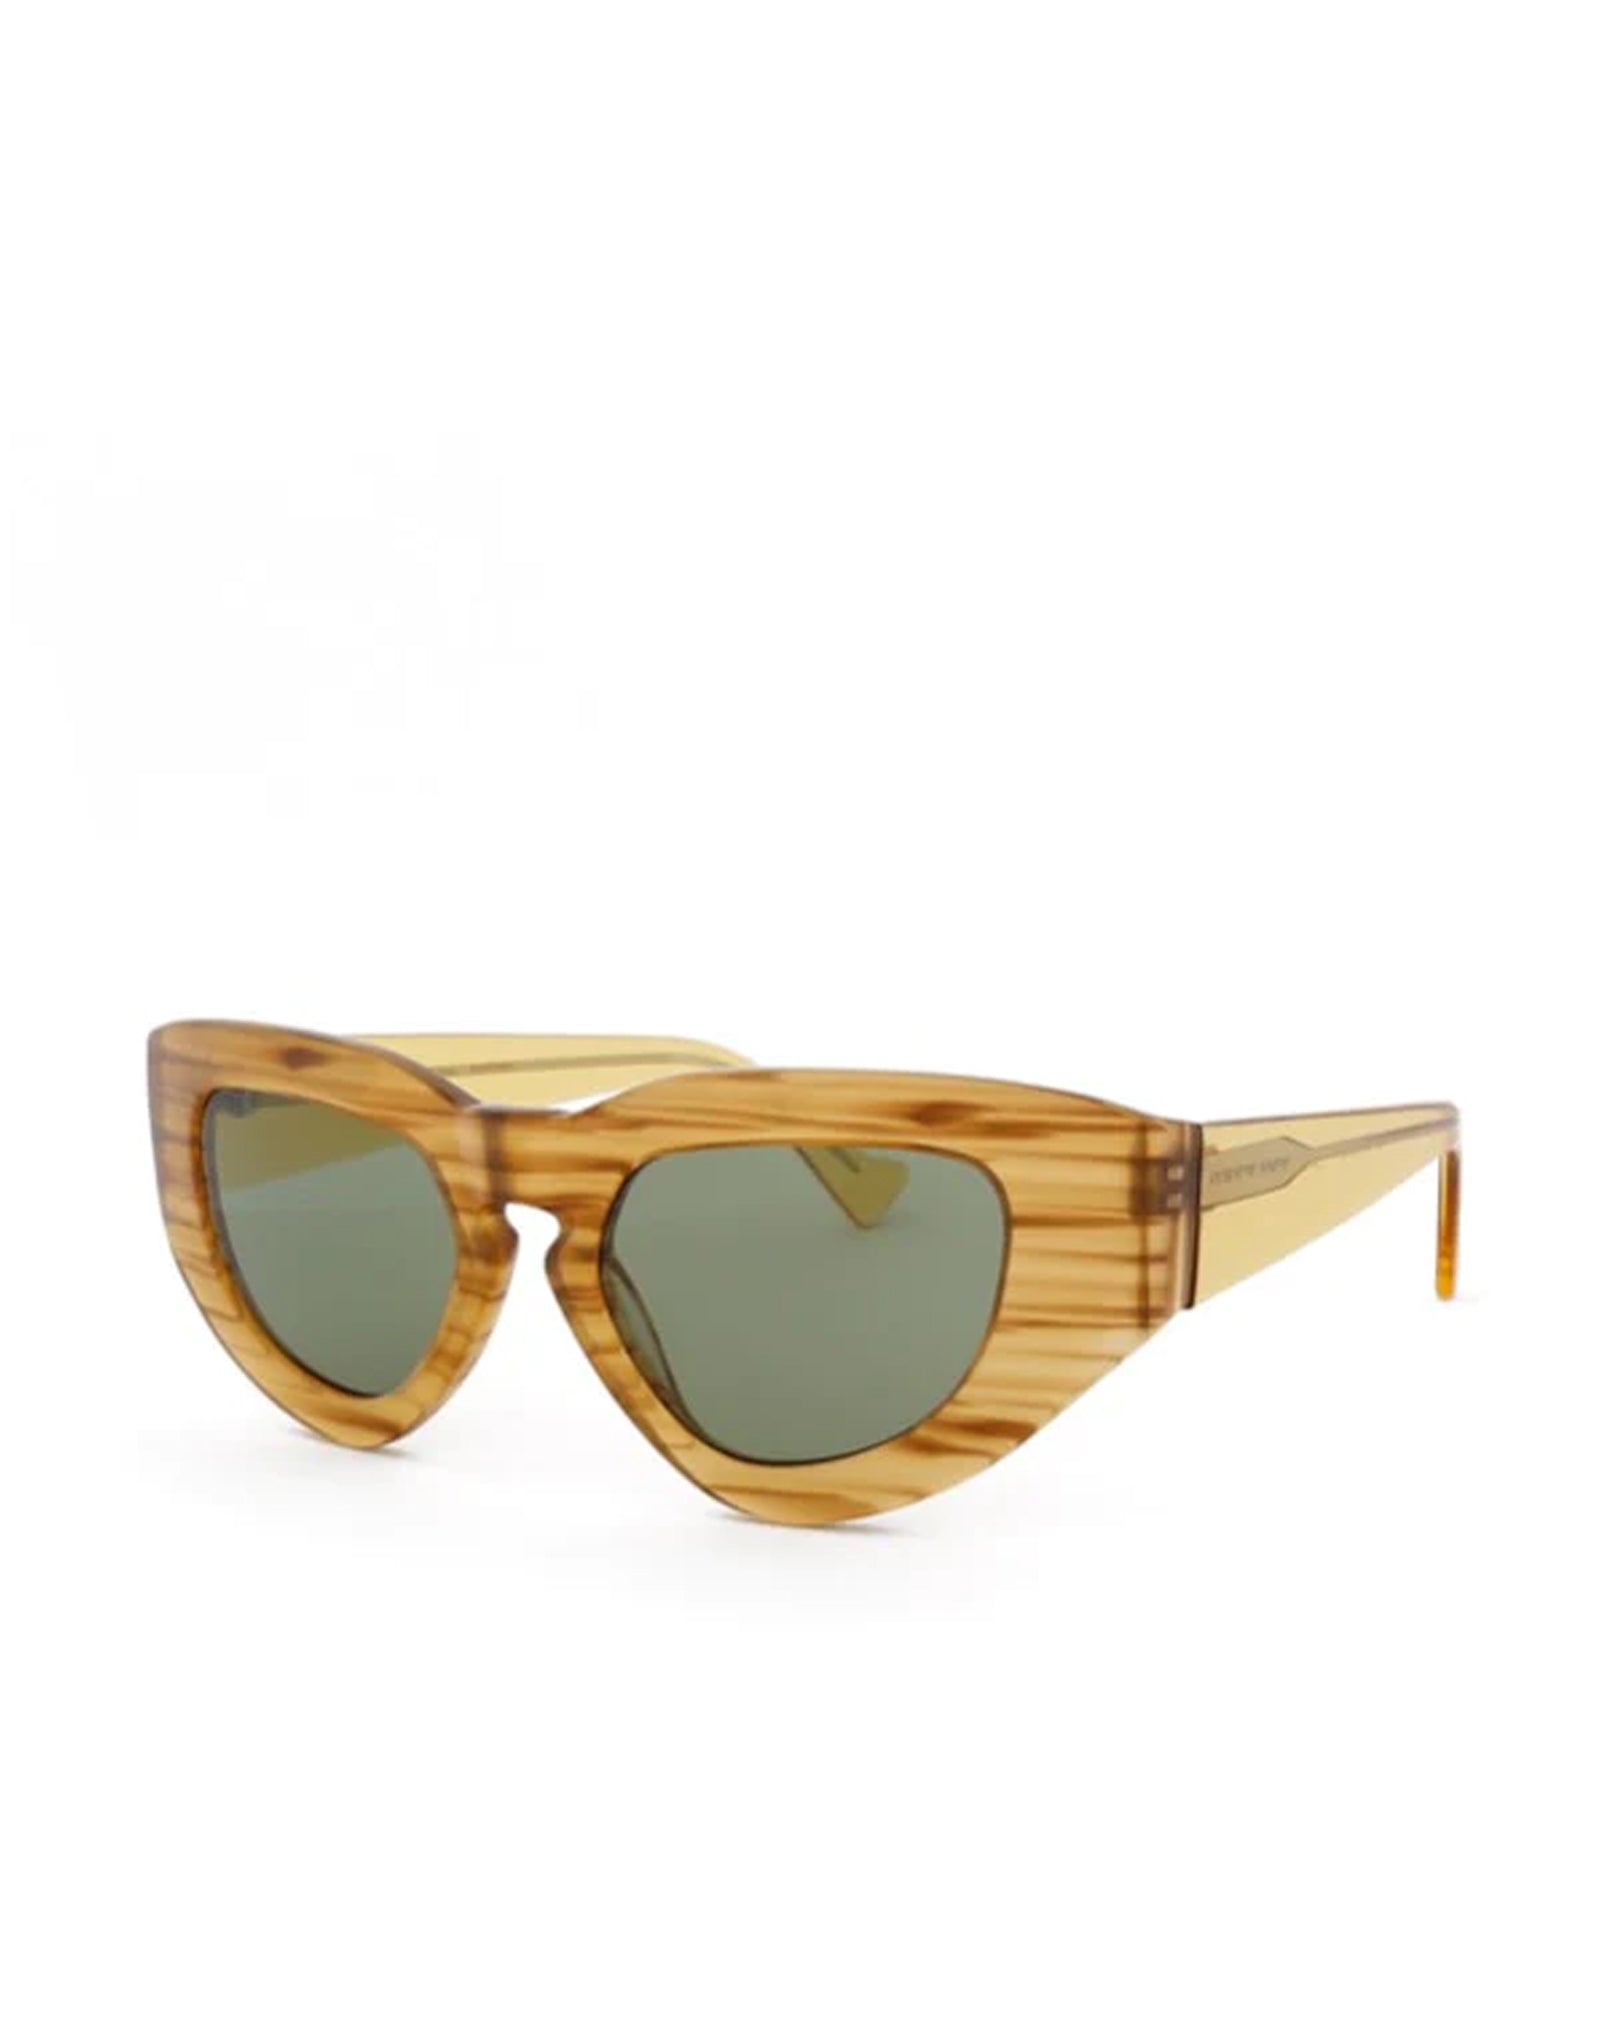 GREY ANT Catskill Sunglasses in Gold Tortoise available at Lahn.shop